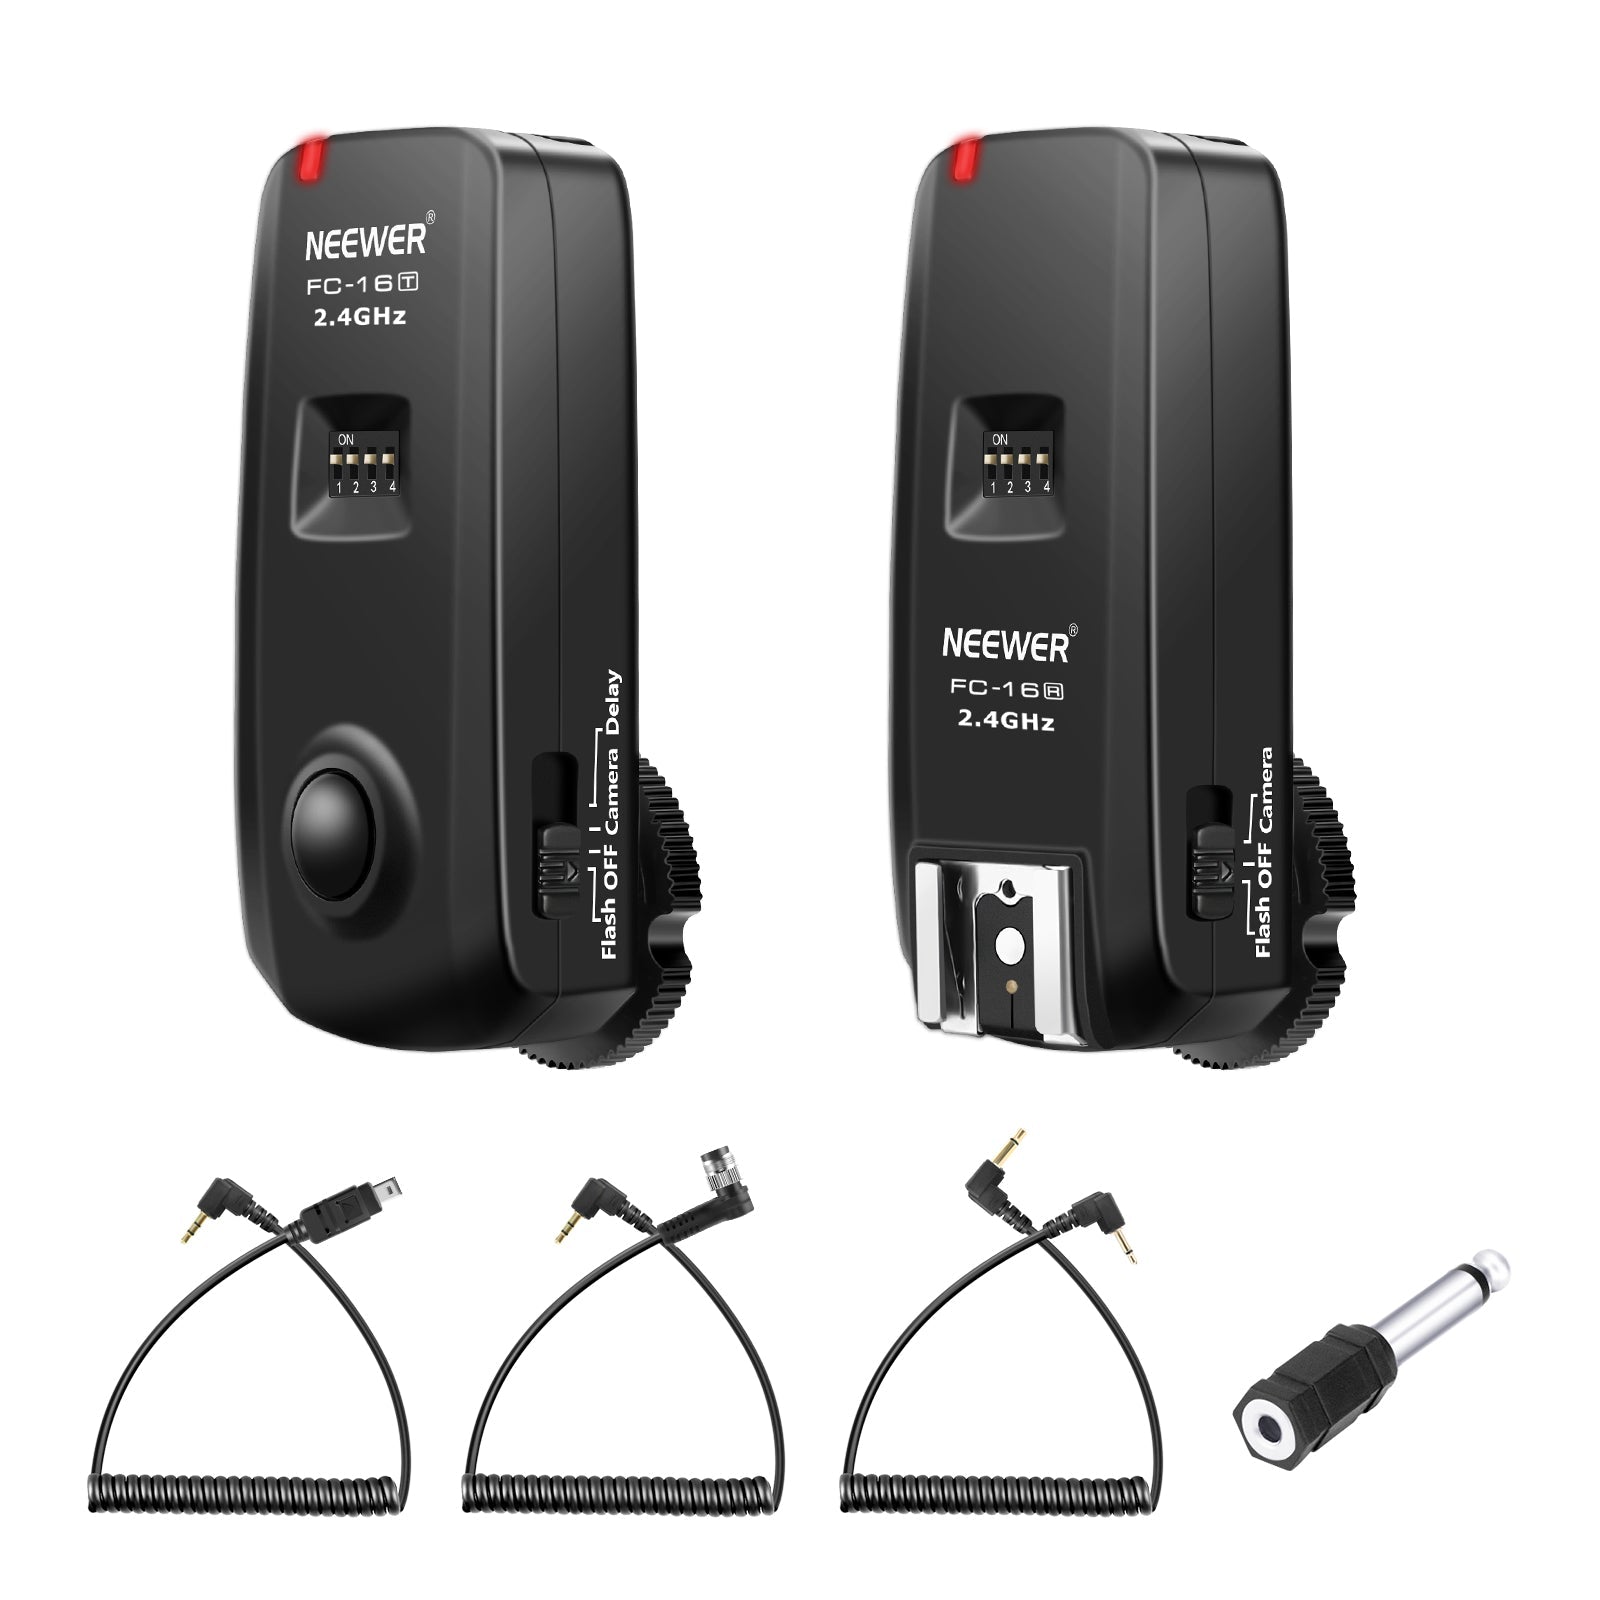 NEEWER FC-16 Wireless Trigger with Remote Shutter for Nikon 